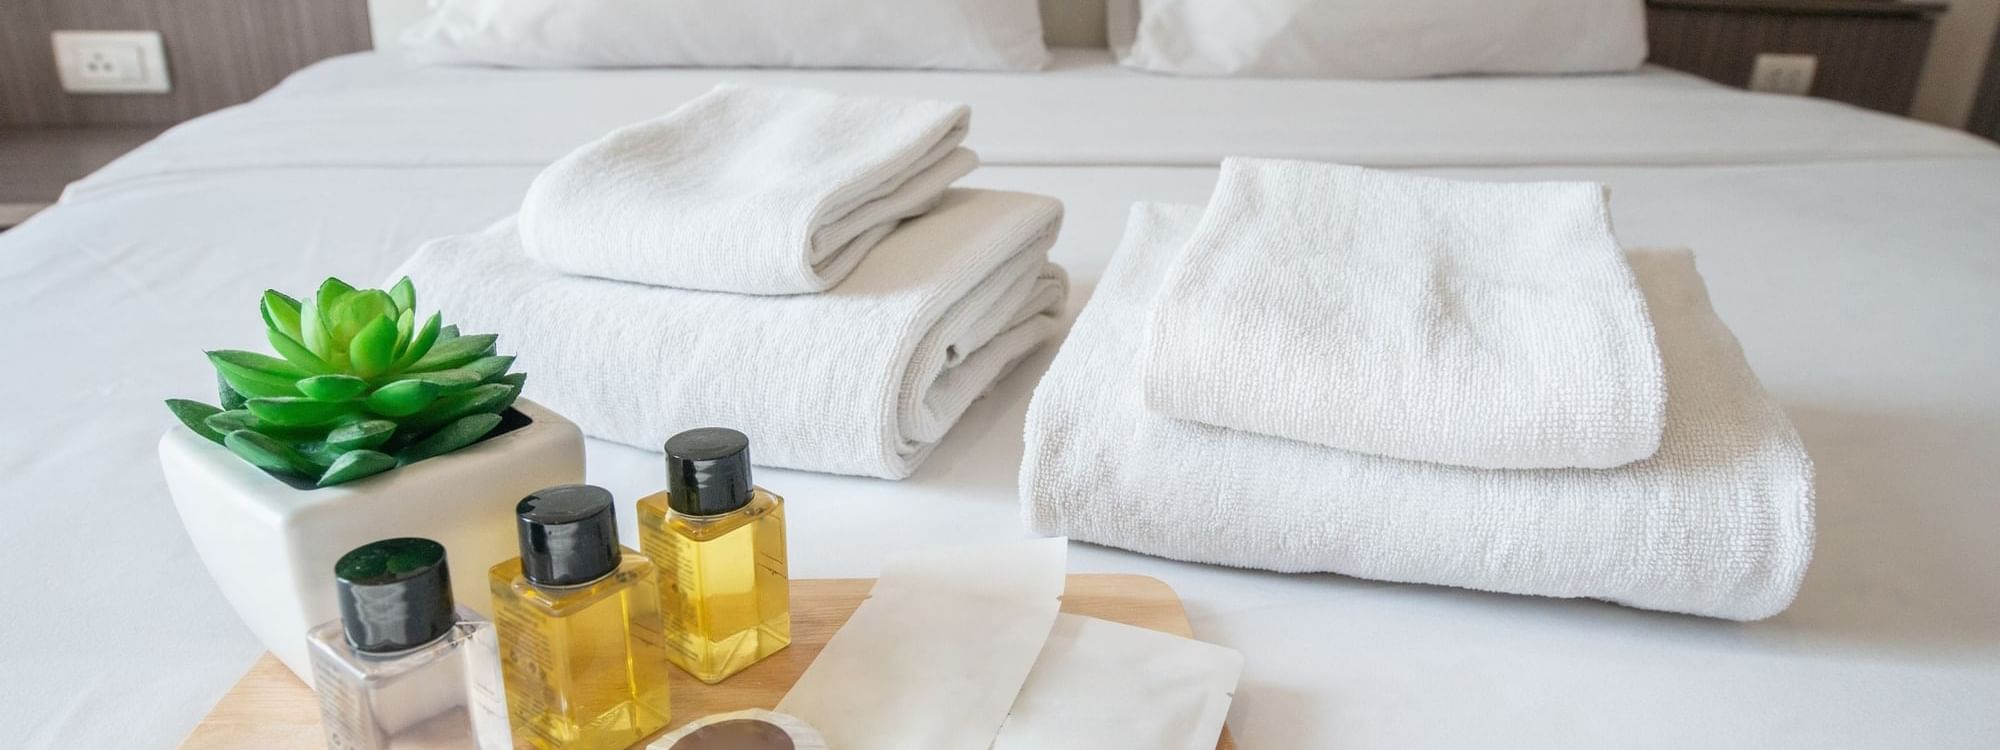 Toiletries and towels on bed at Daydream Island Resort